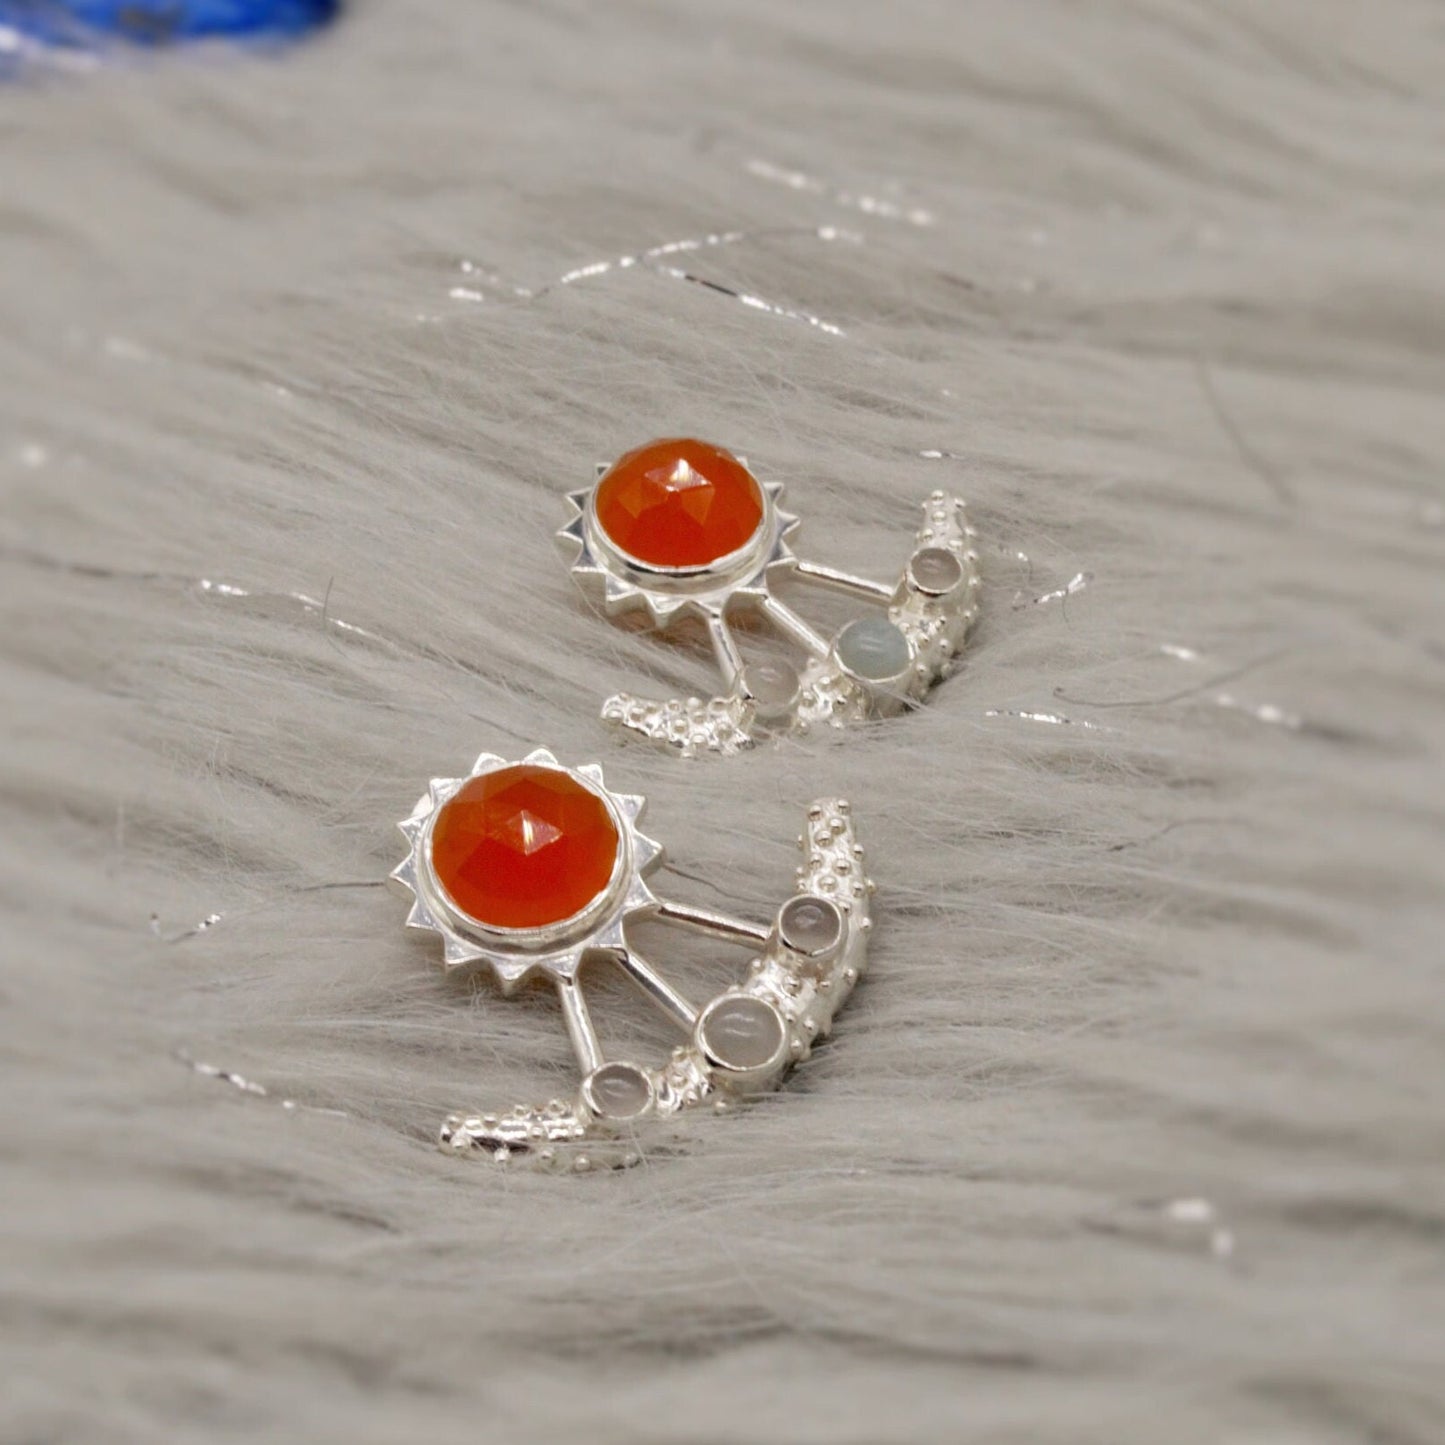 Carnelian and Aquamarine Earrings, Sterling Silver, March Birthstone Jewelry, Aquamarine crystal, Gemstone Earrings, Gift for Her